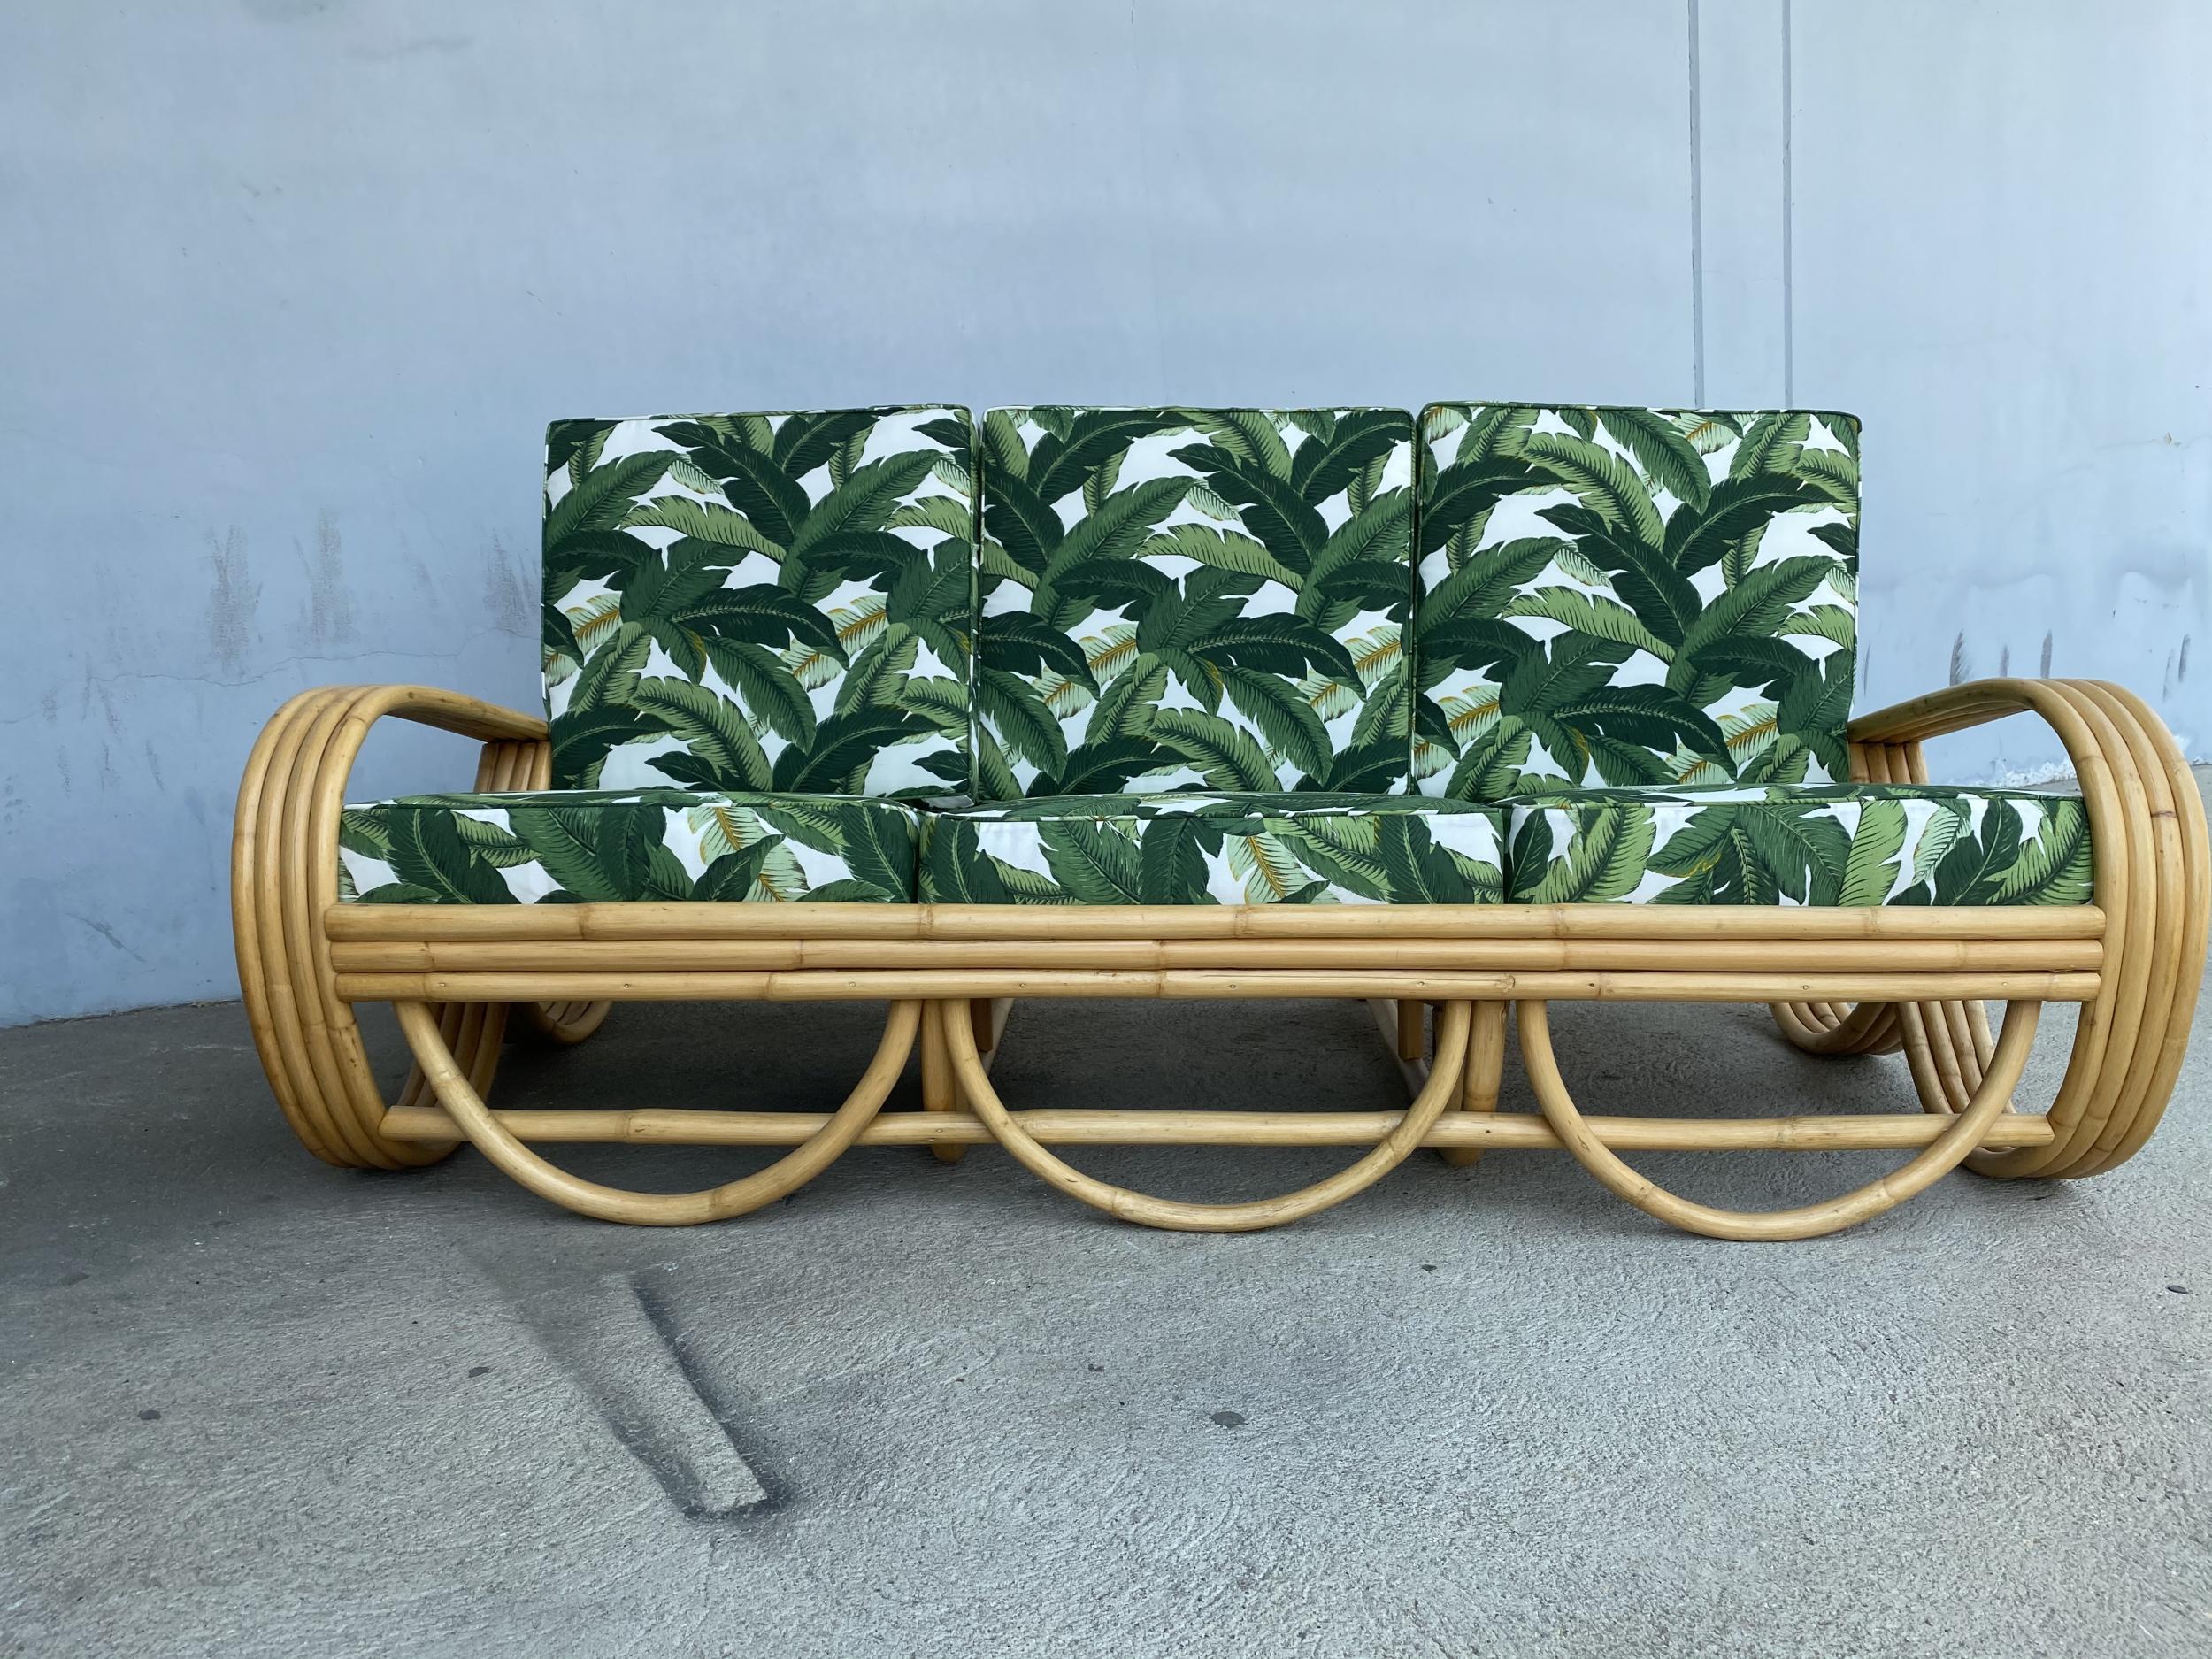 Four-strand 3/4 reverse pretzel rattan sofa and four strand lounge chair set both featuring a decorative wave detail on the base. 

Reminiscent of the sofas done by Paul Frankl in the 1940s.

Sofa: 28